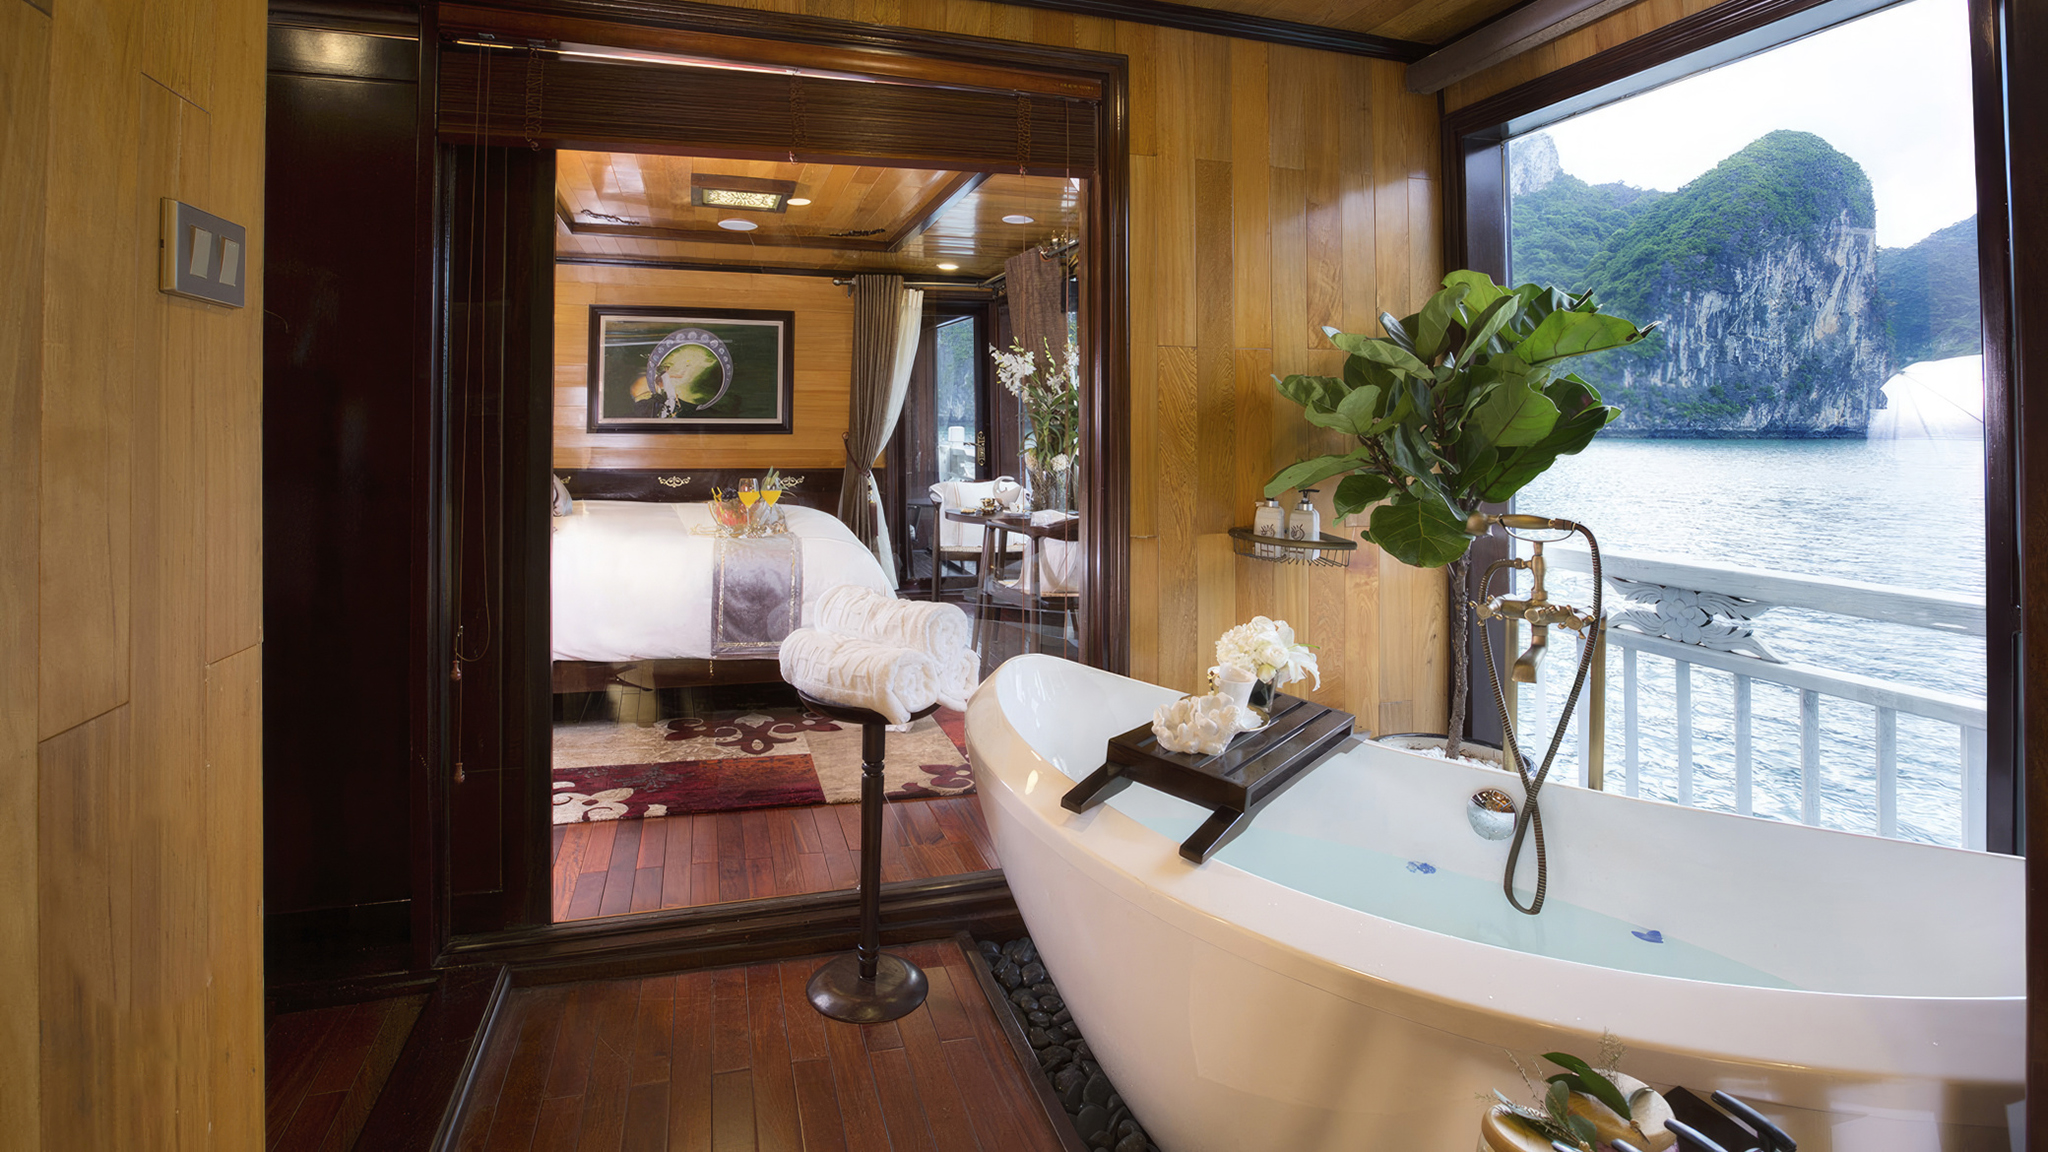 Bathroom with the bathtub and Halong Bay view